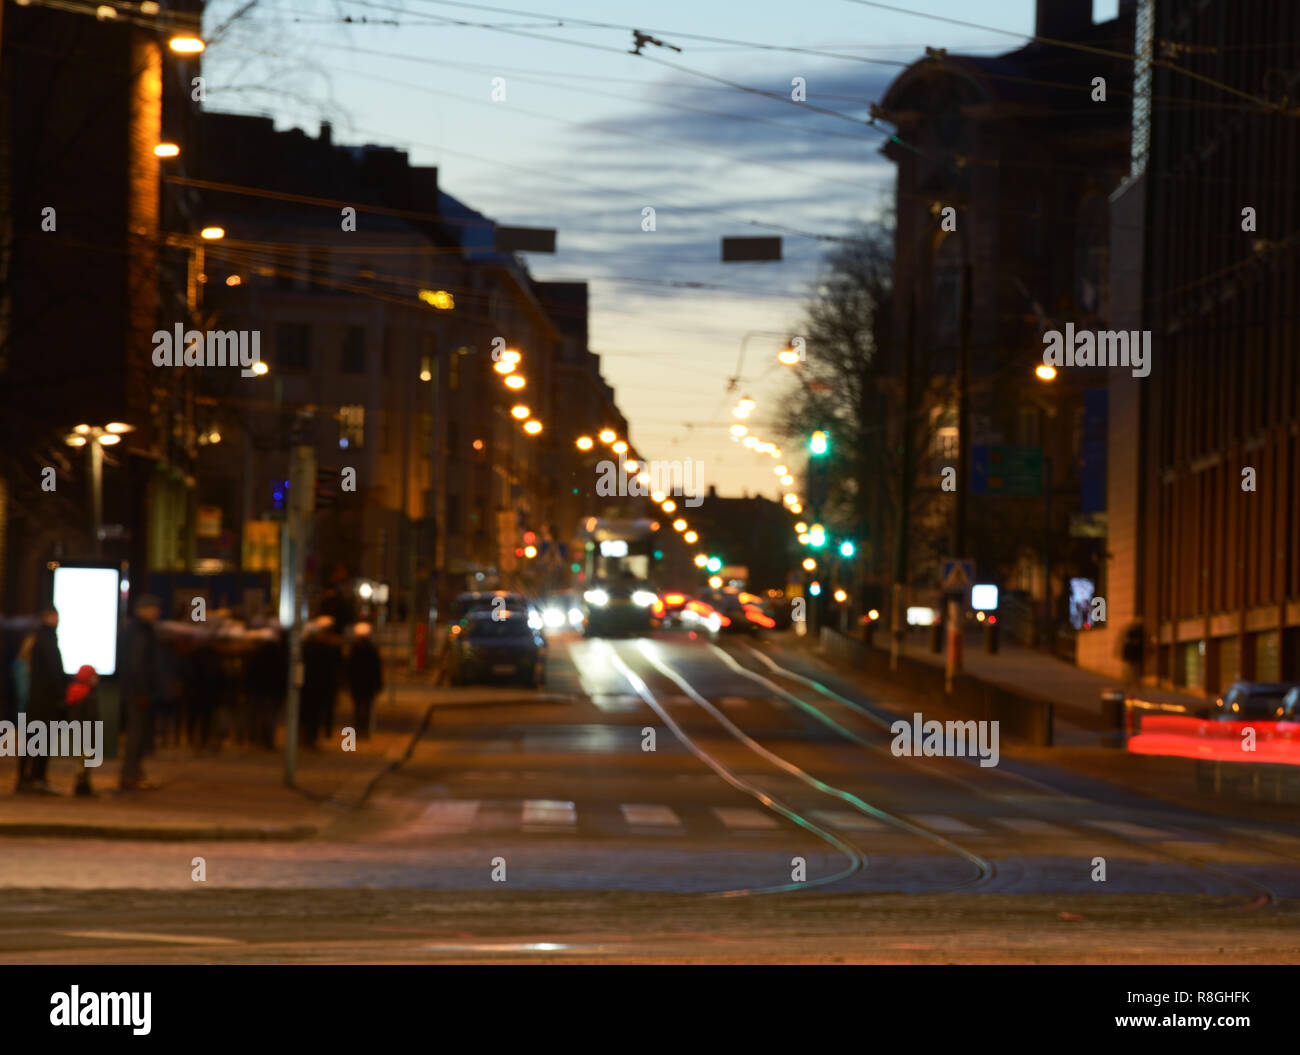 blurred image of night city, street lights and sky Stock Photo